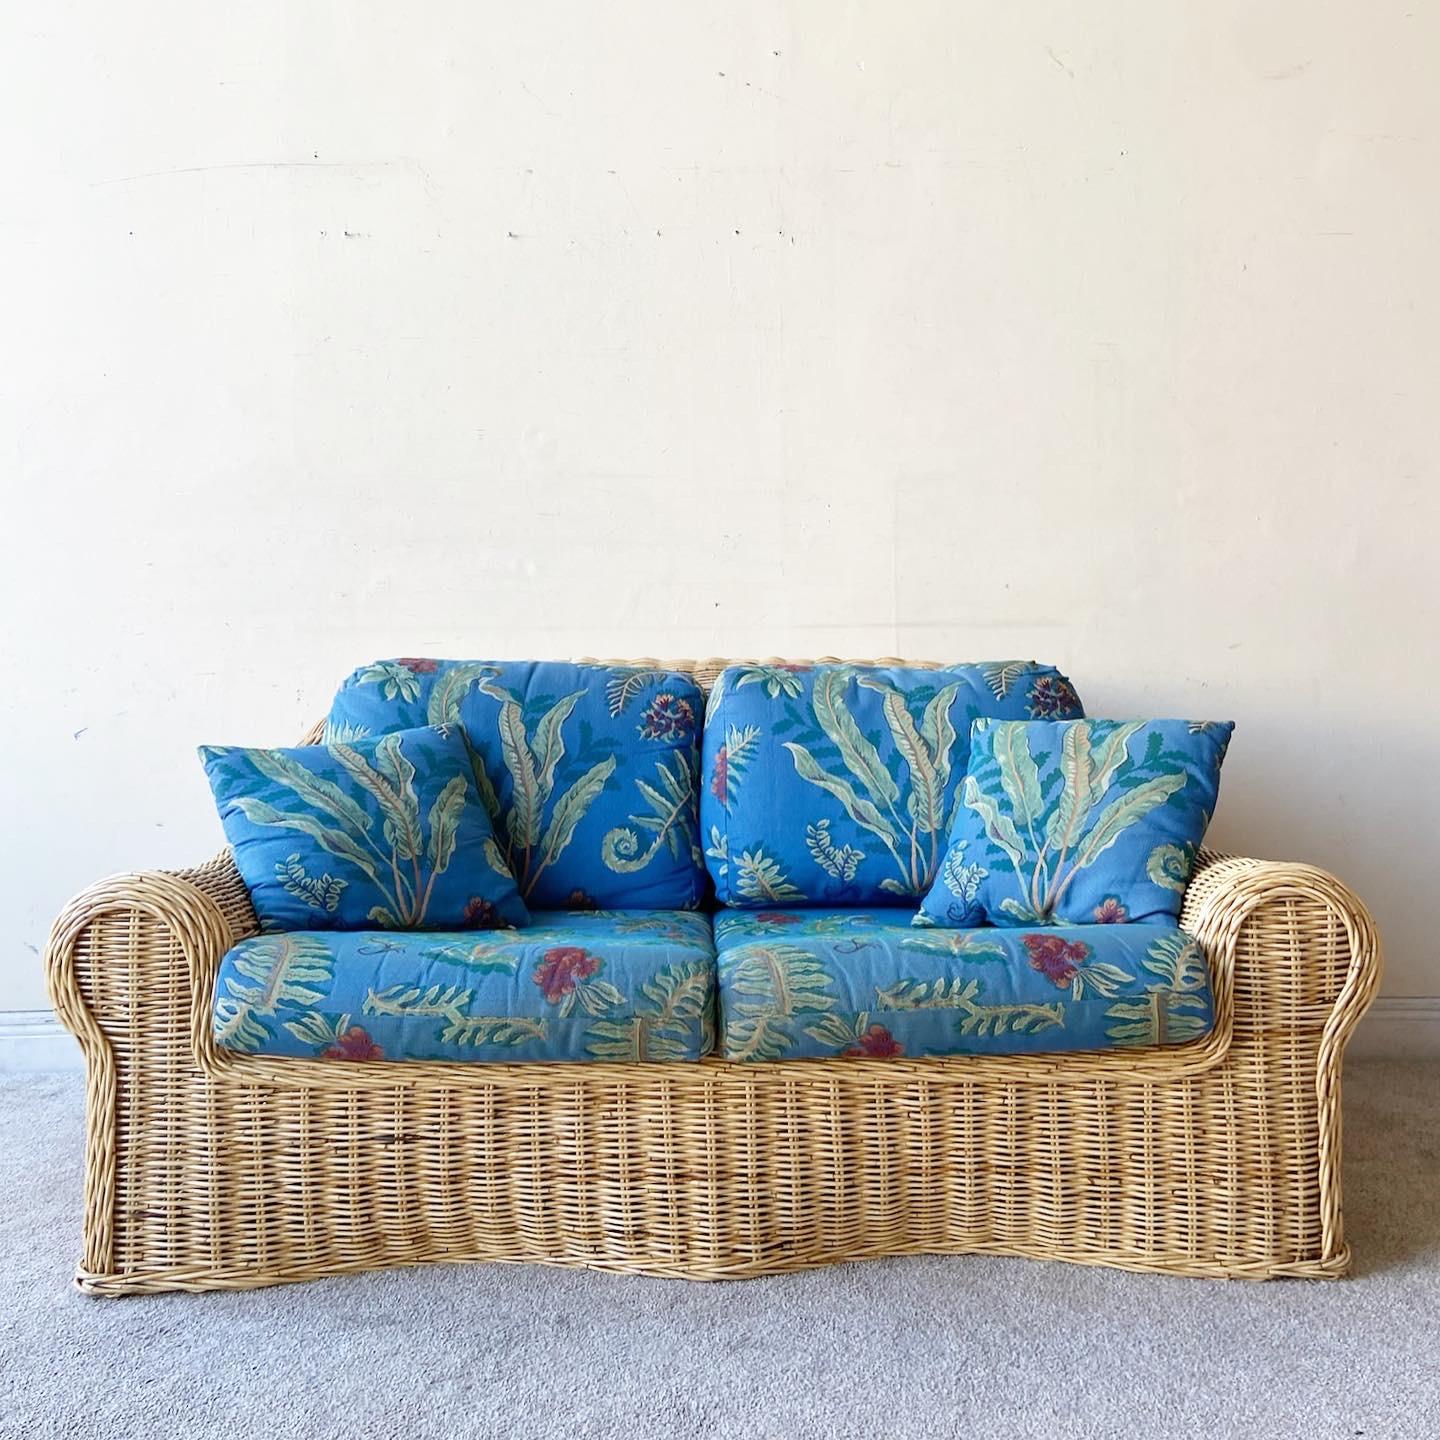 Amazing vintage bohemian wicker love seat sofa. Features a fantastic sculpted wicker throughout the entire sofa. Cushions can be left out if desired.